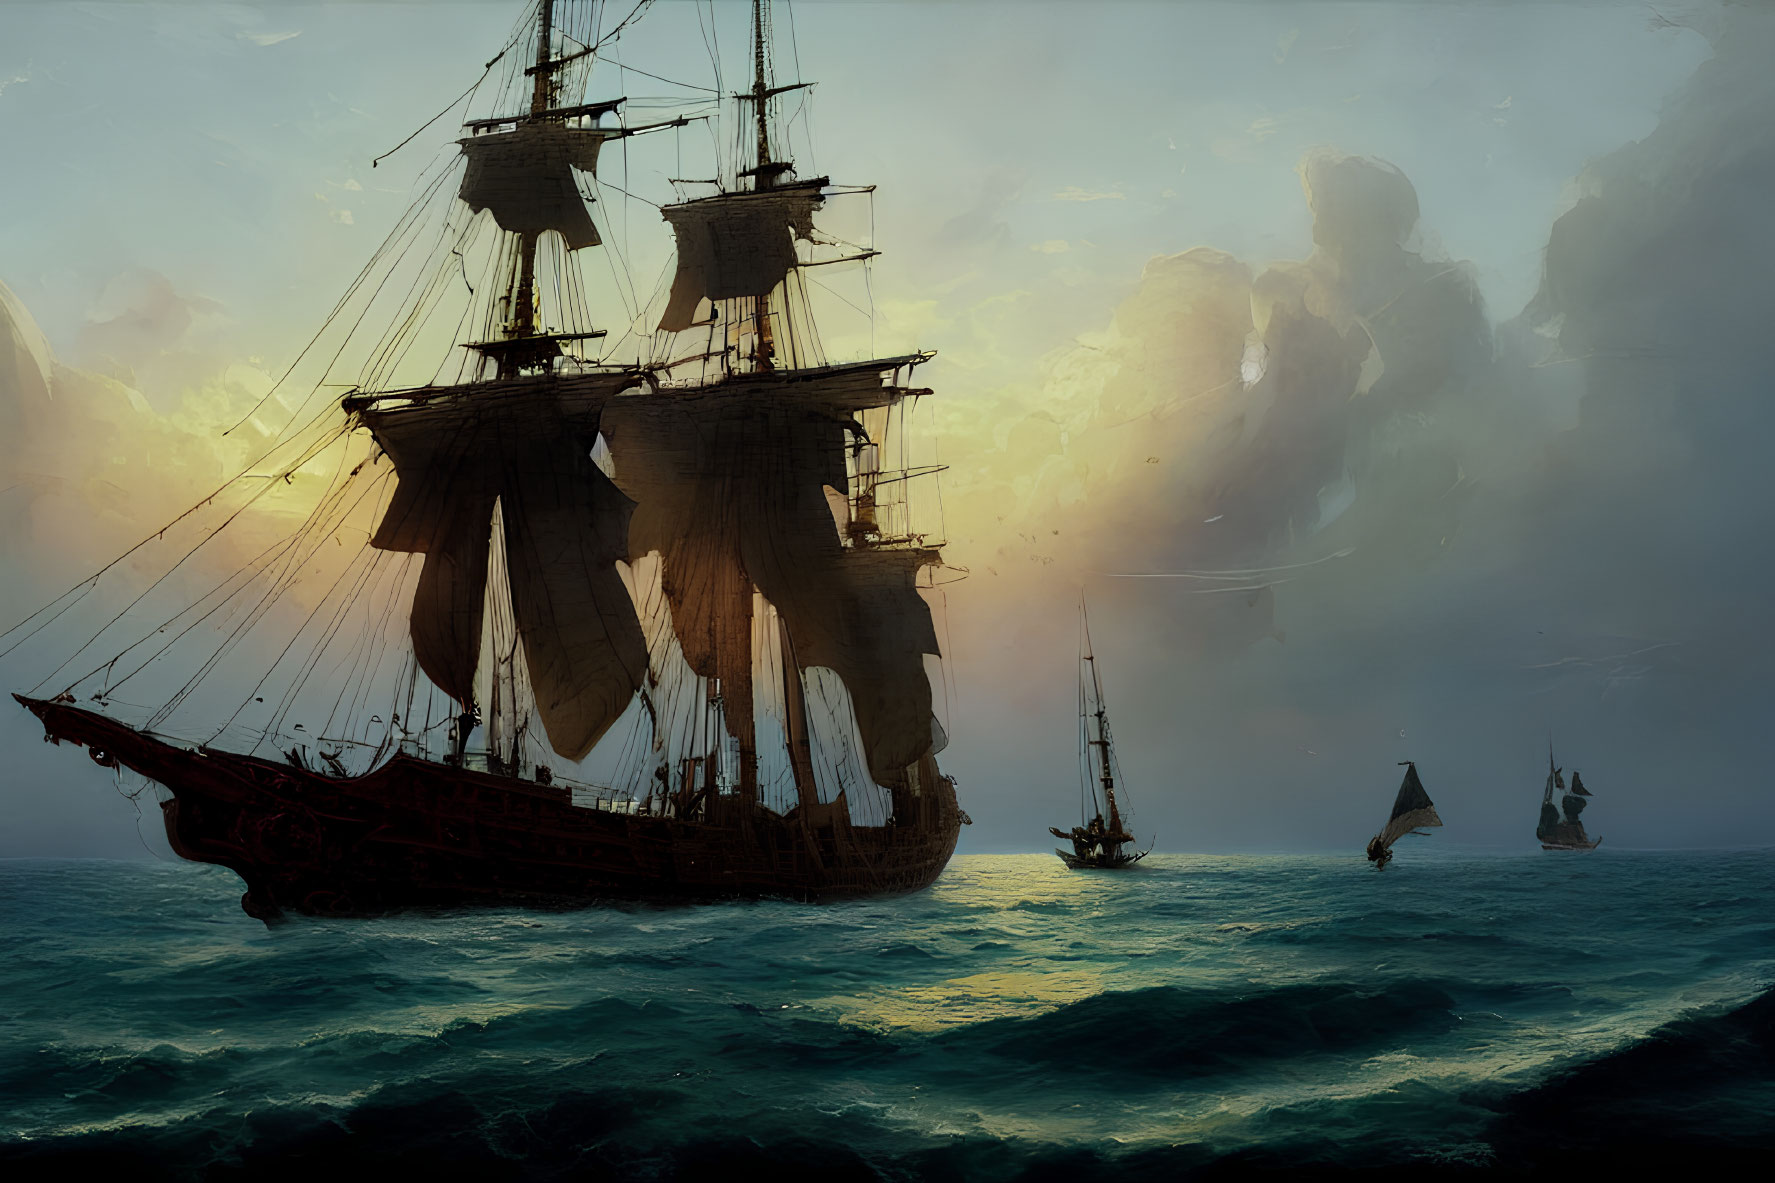 Sailing ship with billowing sails leads fleet on stormy sea at dusk